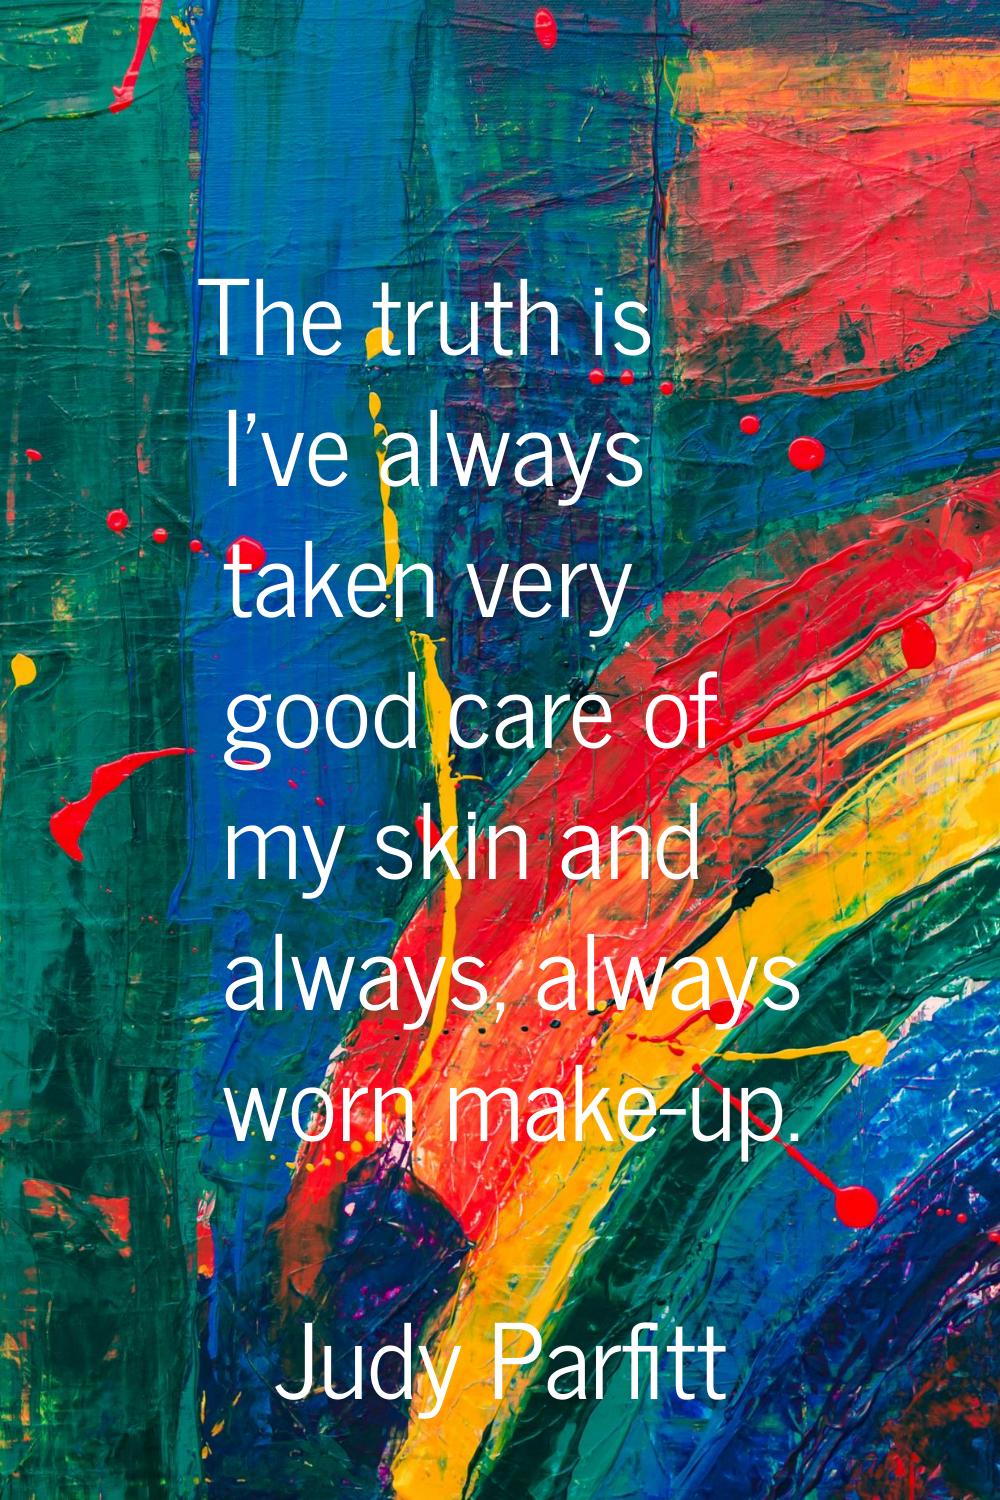 The truth is I've always taken very good care of my skin and always, always worn make-up.